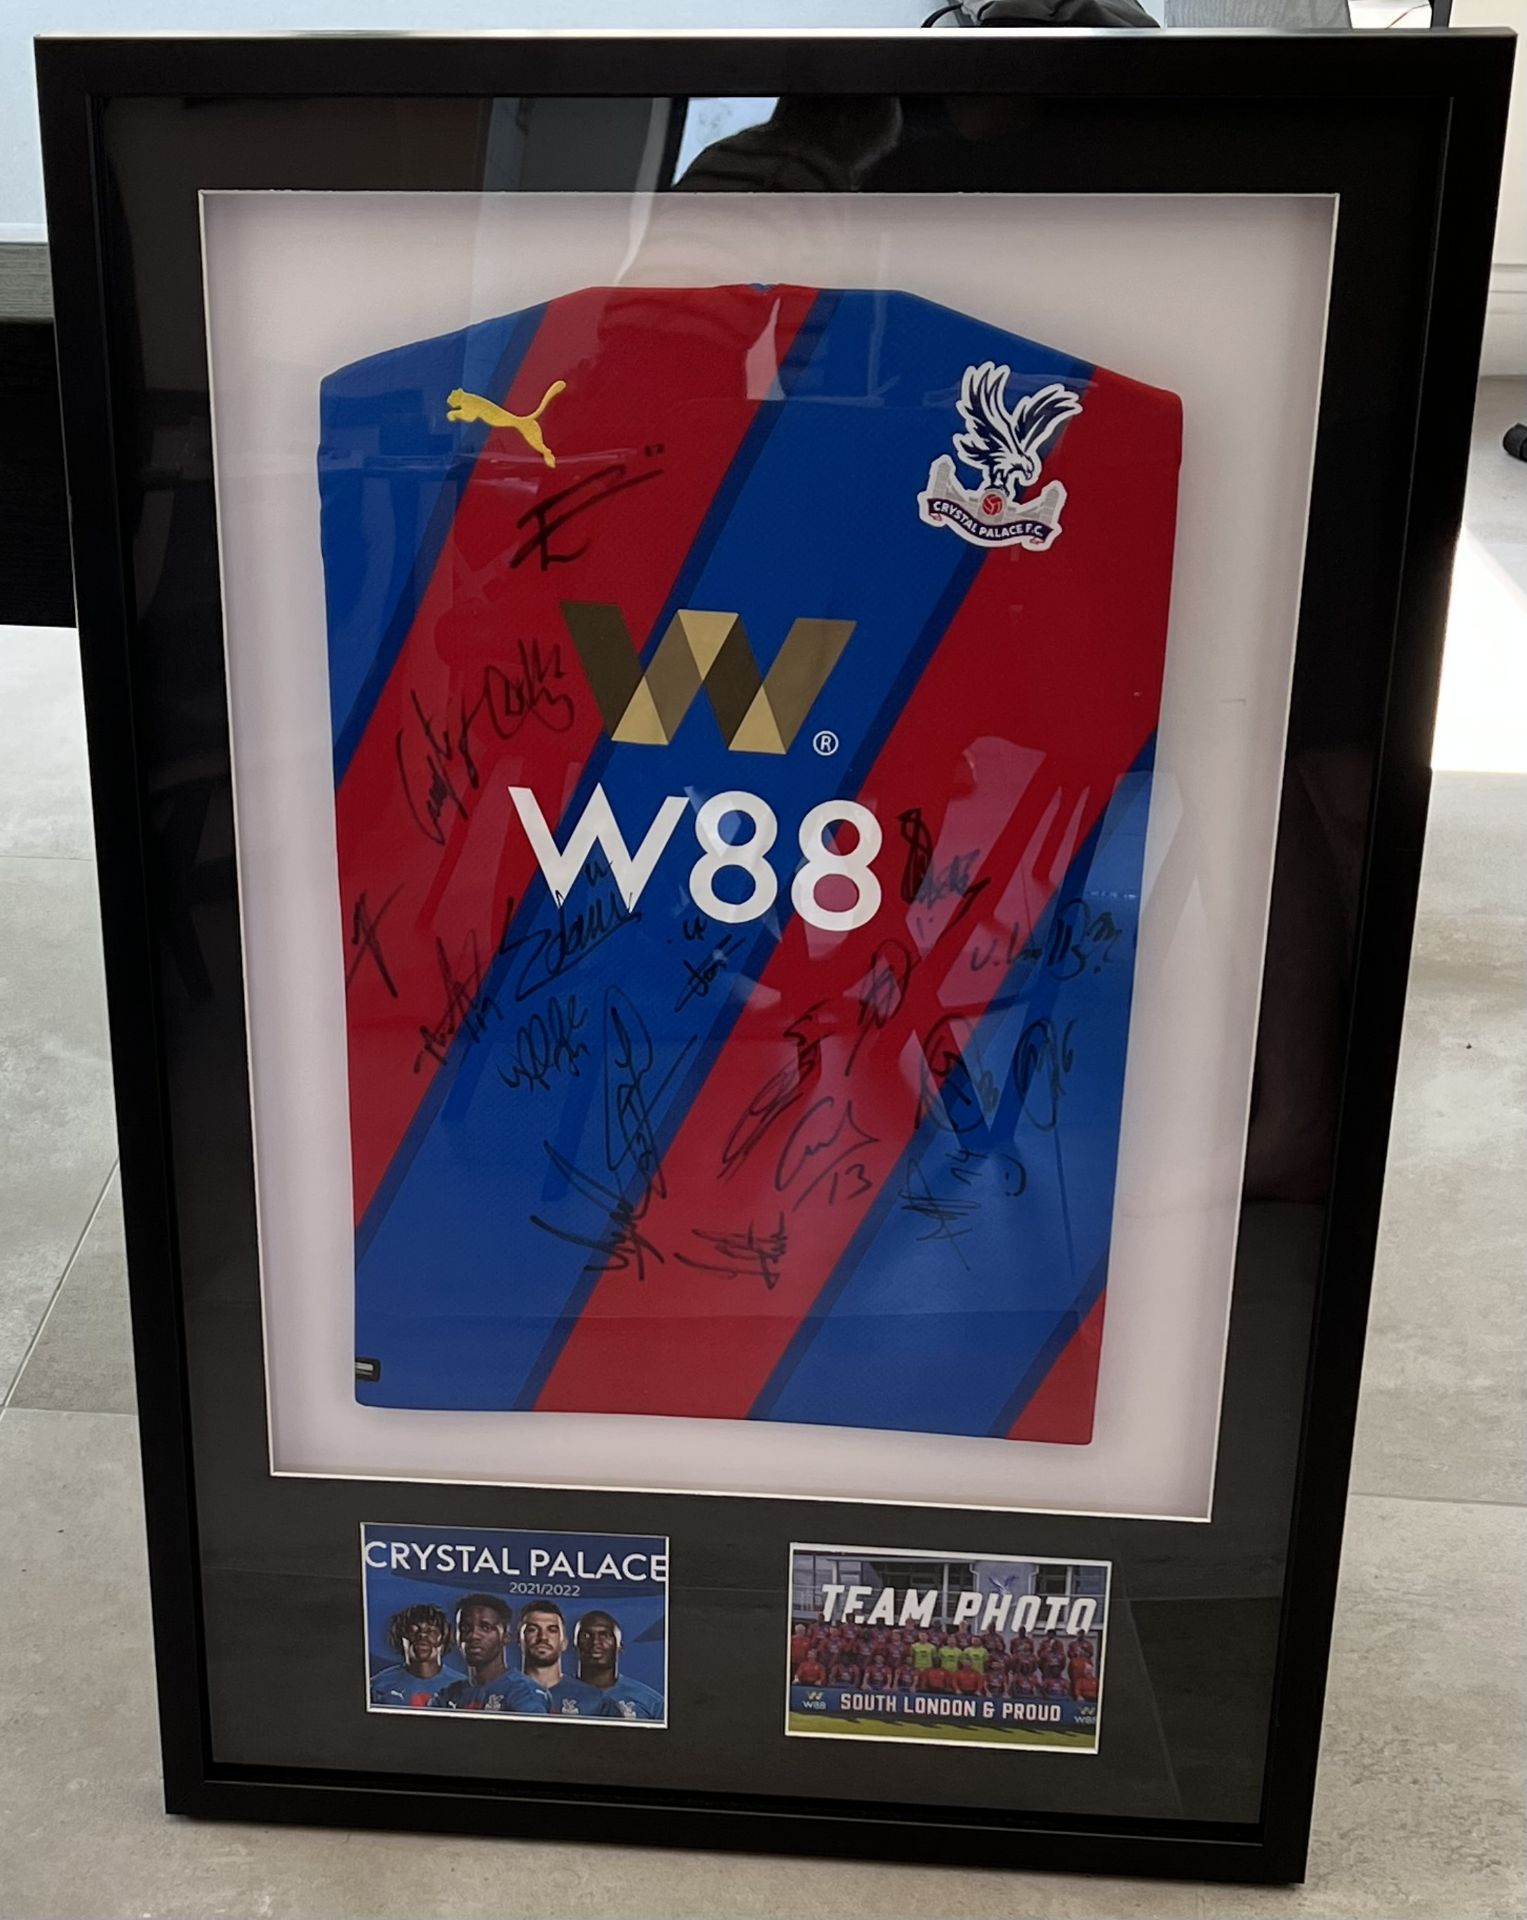 A Crystal Palace FC display, featuring a signed shirt from the 2021/22 season. The shirt is